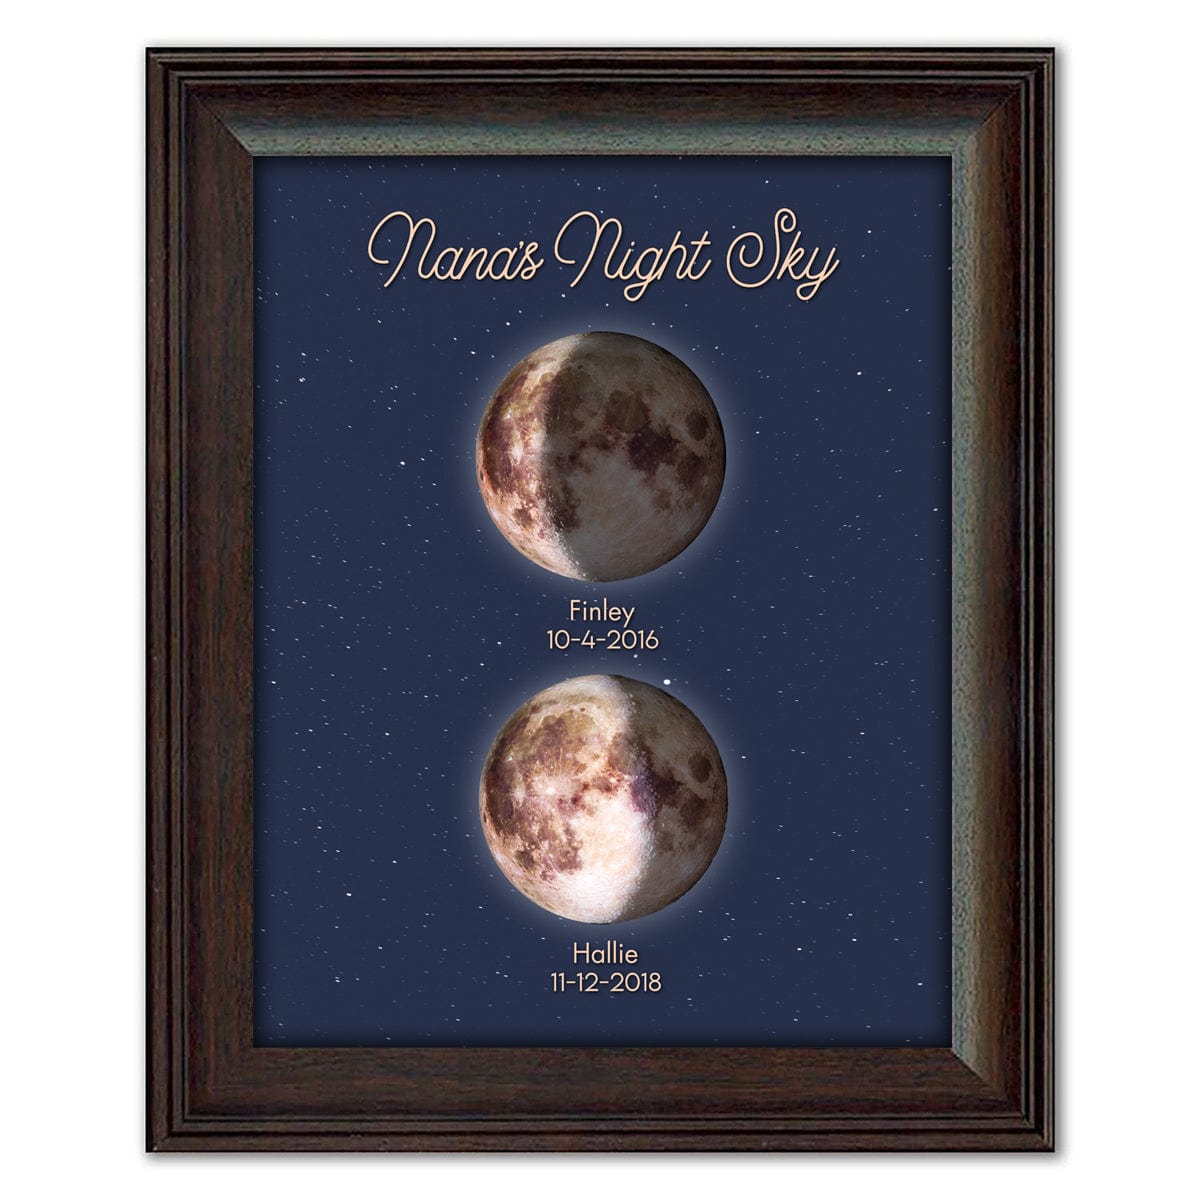 Framed Behind Glass finish of mom and children night sky